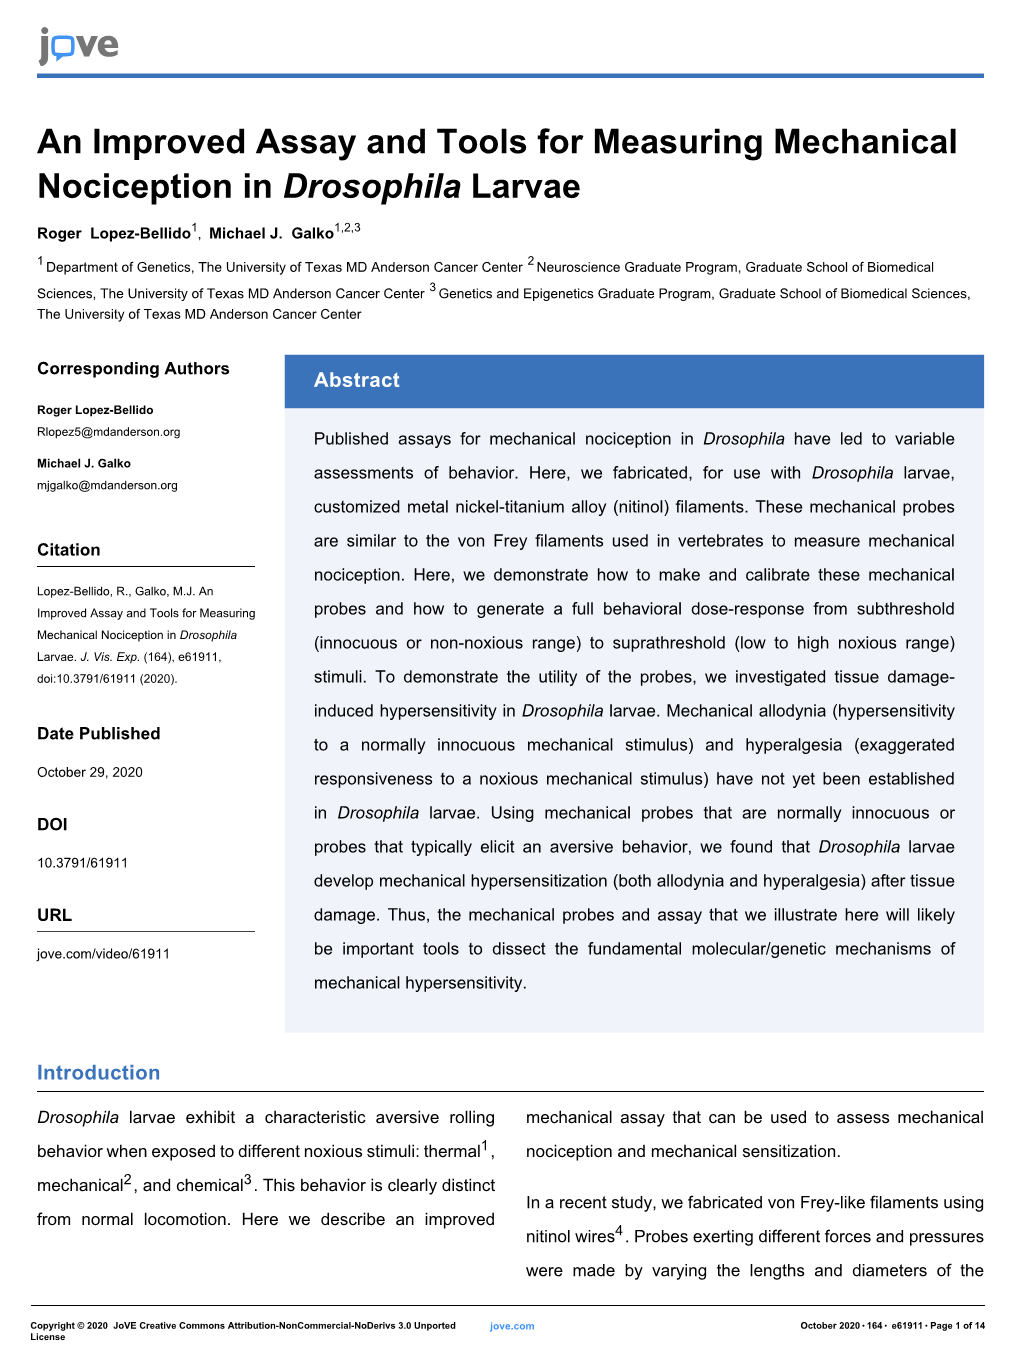 An Improved Assay and Tools for Measuring Mechanical Nociception in Drosophila Larvae